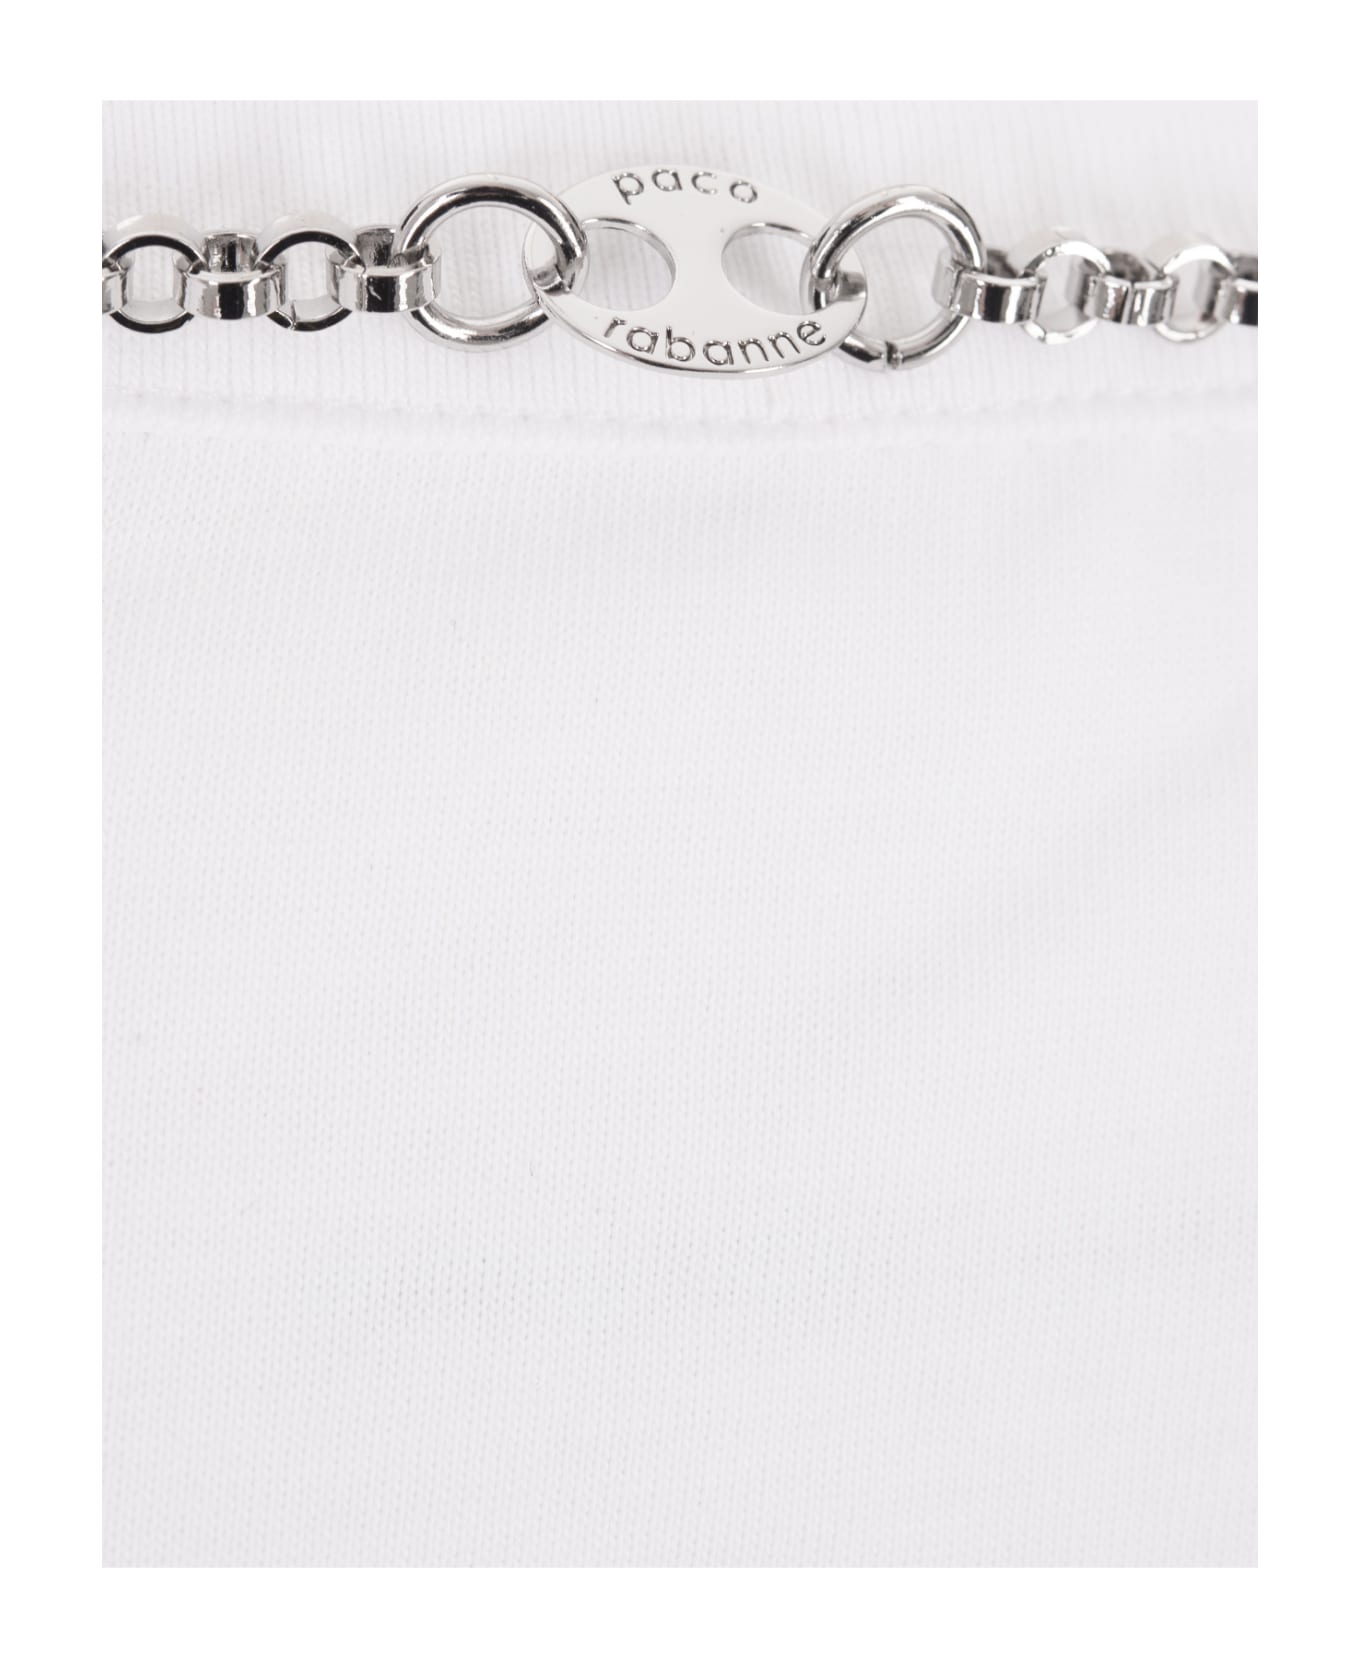 Paco Rabanne White Short T-shirt With Silver Mesh Panel - SILVER/WHITE